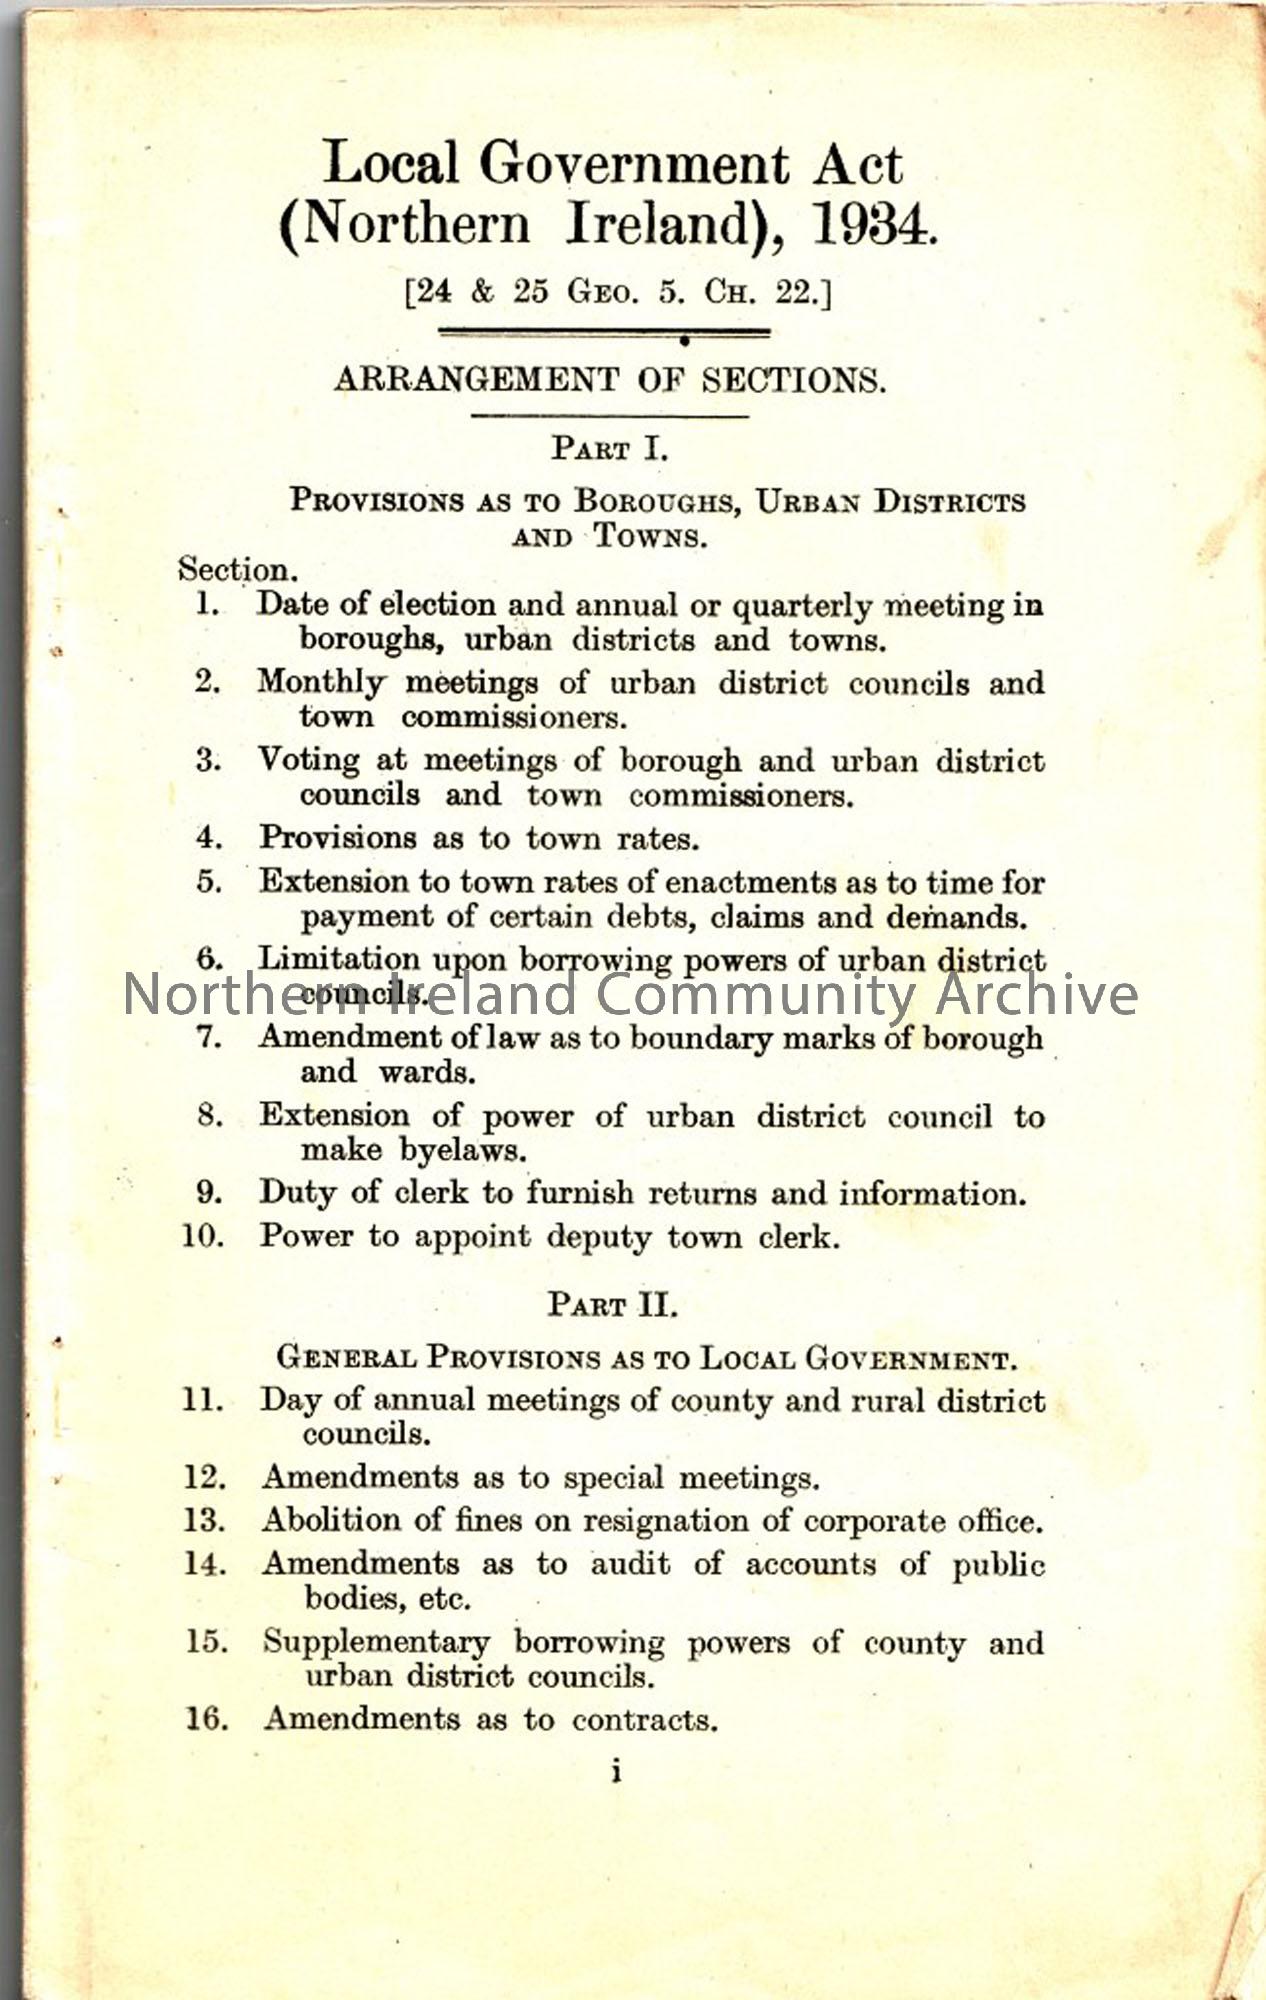 Local Government Act (Northern Ireland), 1934